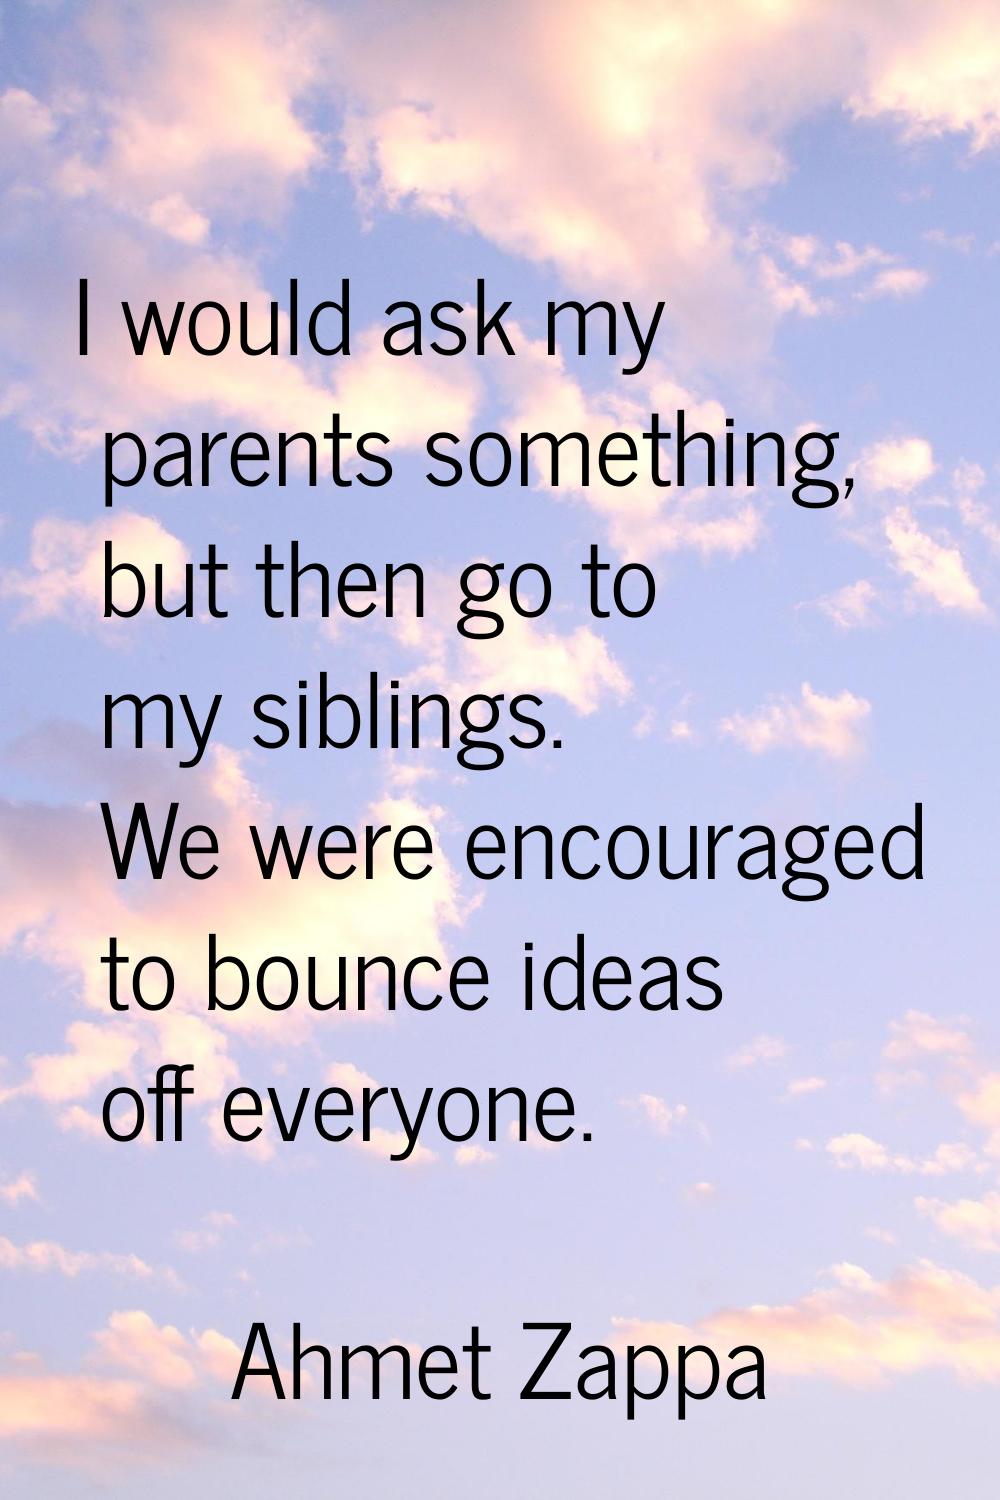 I would ask my parents something, but then go to my siblings. We were encouraged to bounce ideas of